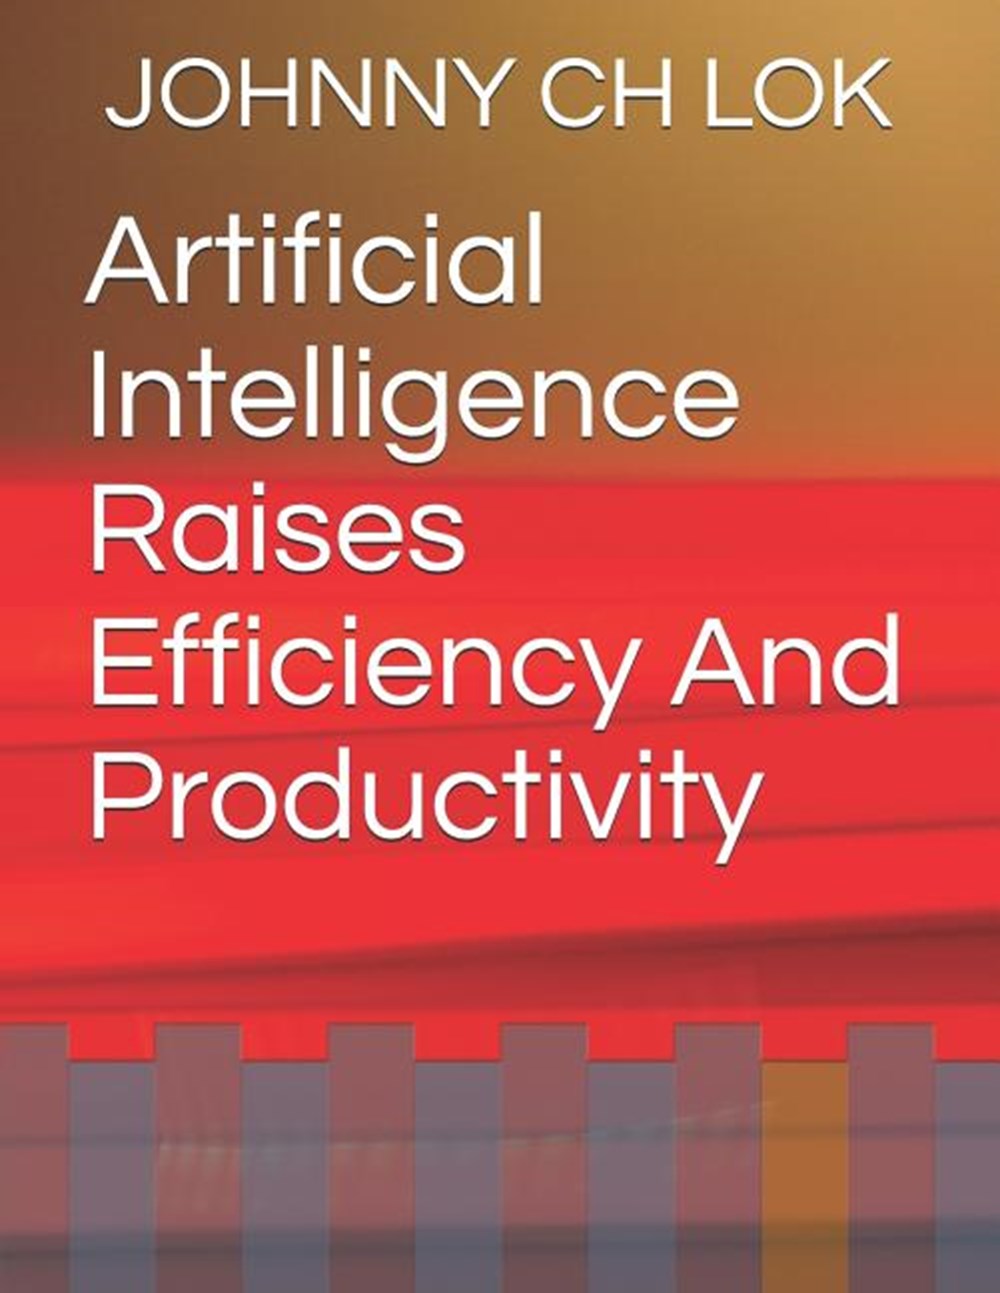 Artificial Intelligence Raises Efficiency and Productivity